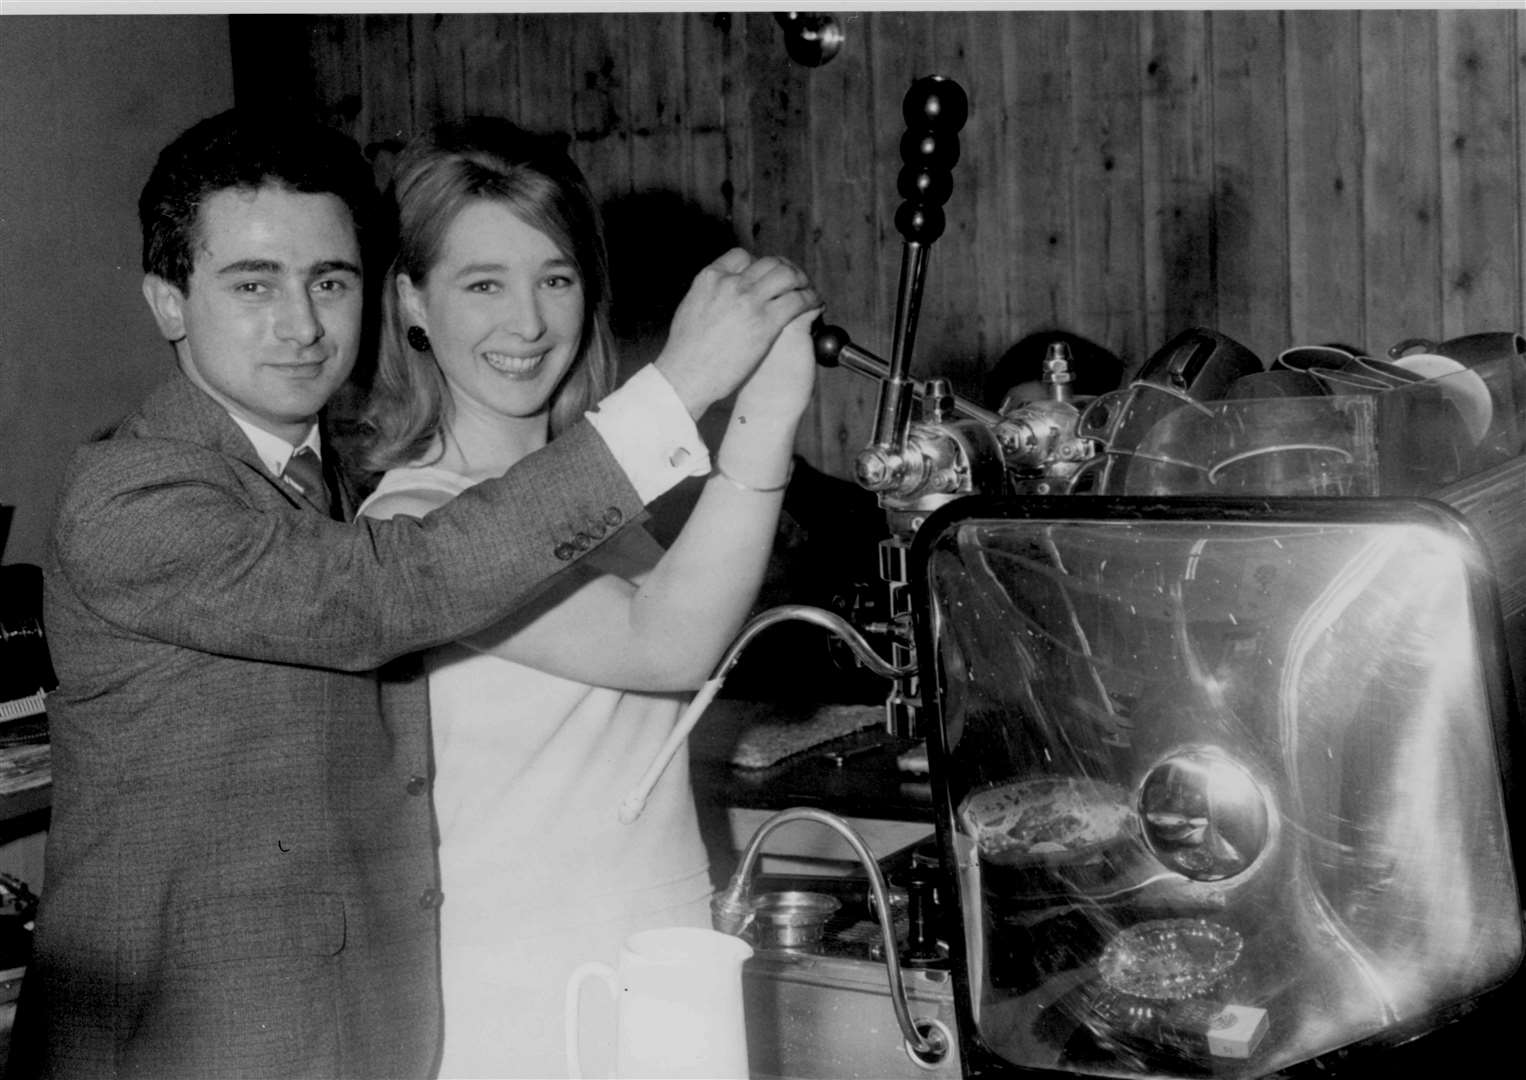 Italian-born Franco Bevan, helped by Marlowe actress Lynne Ashcroft, opened Canterbury's new nightclub, the Beehive in Dover Street, in May 1965. There were three rooms where members could dance, talk or drink coffee